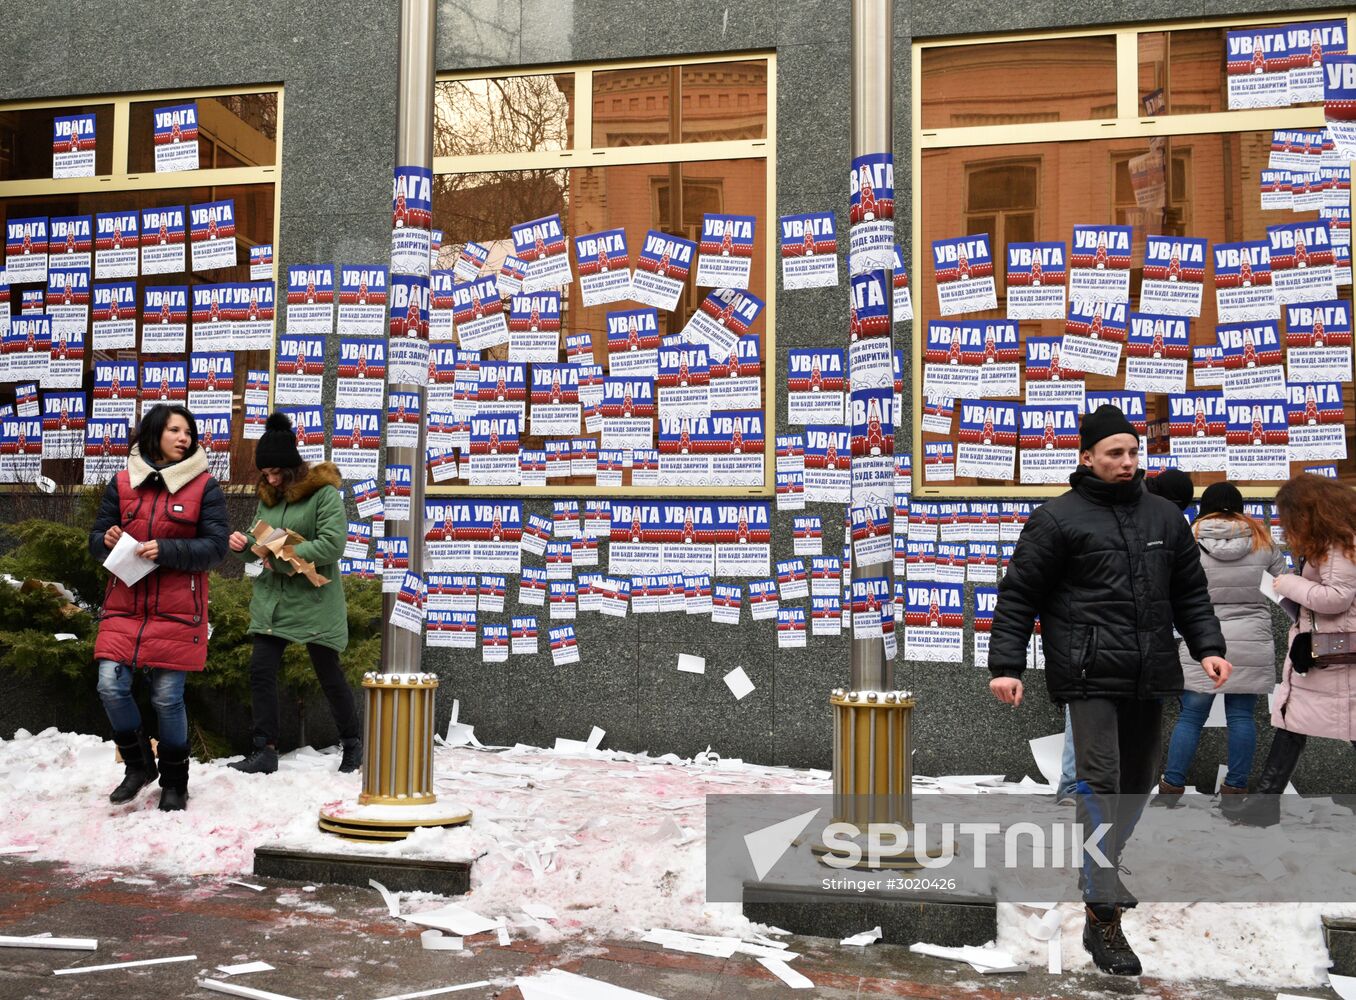 Radicals action at Russian banks branches in Kyiv